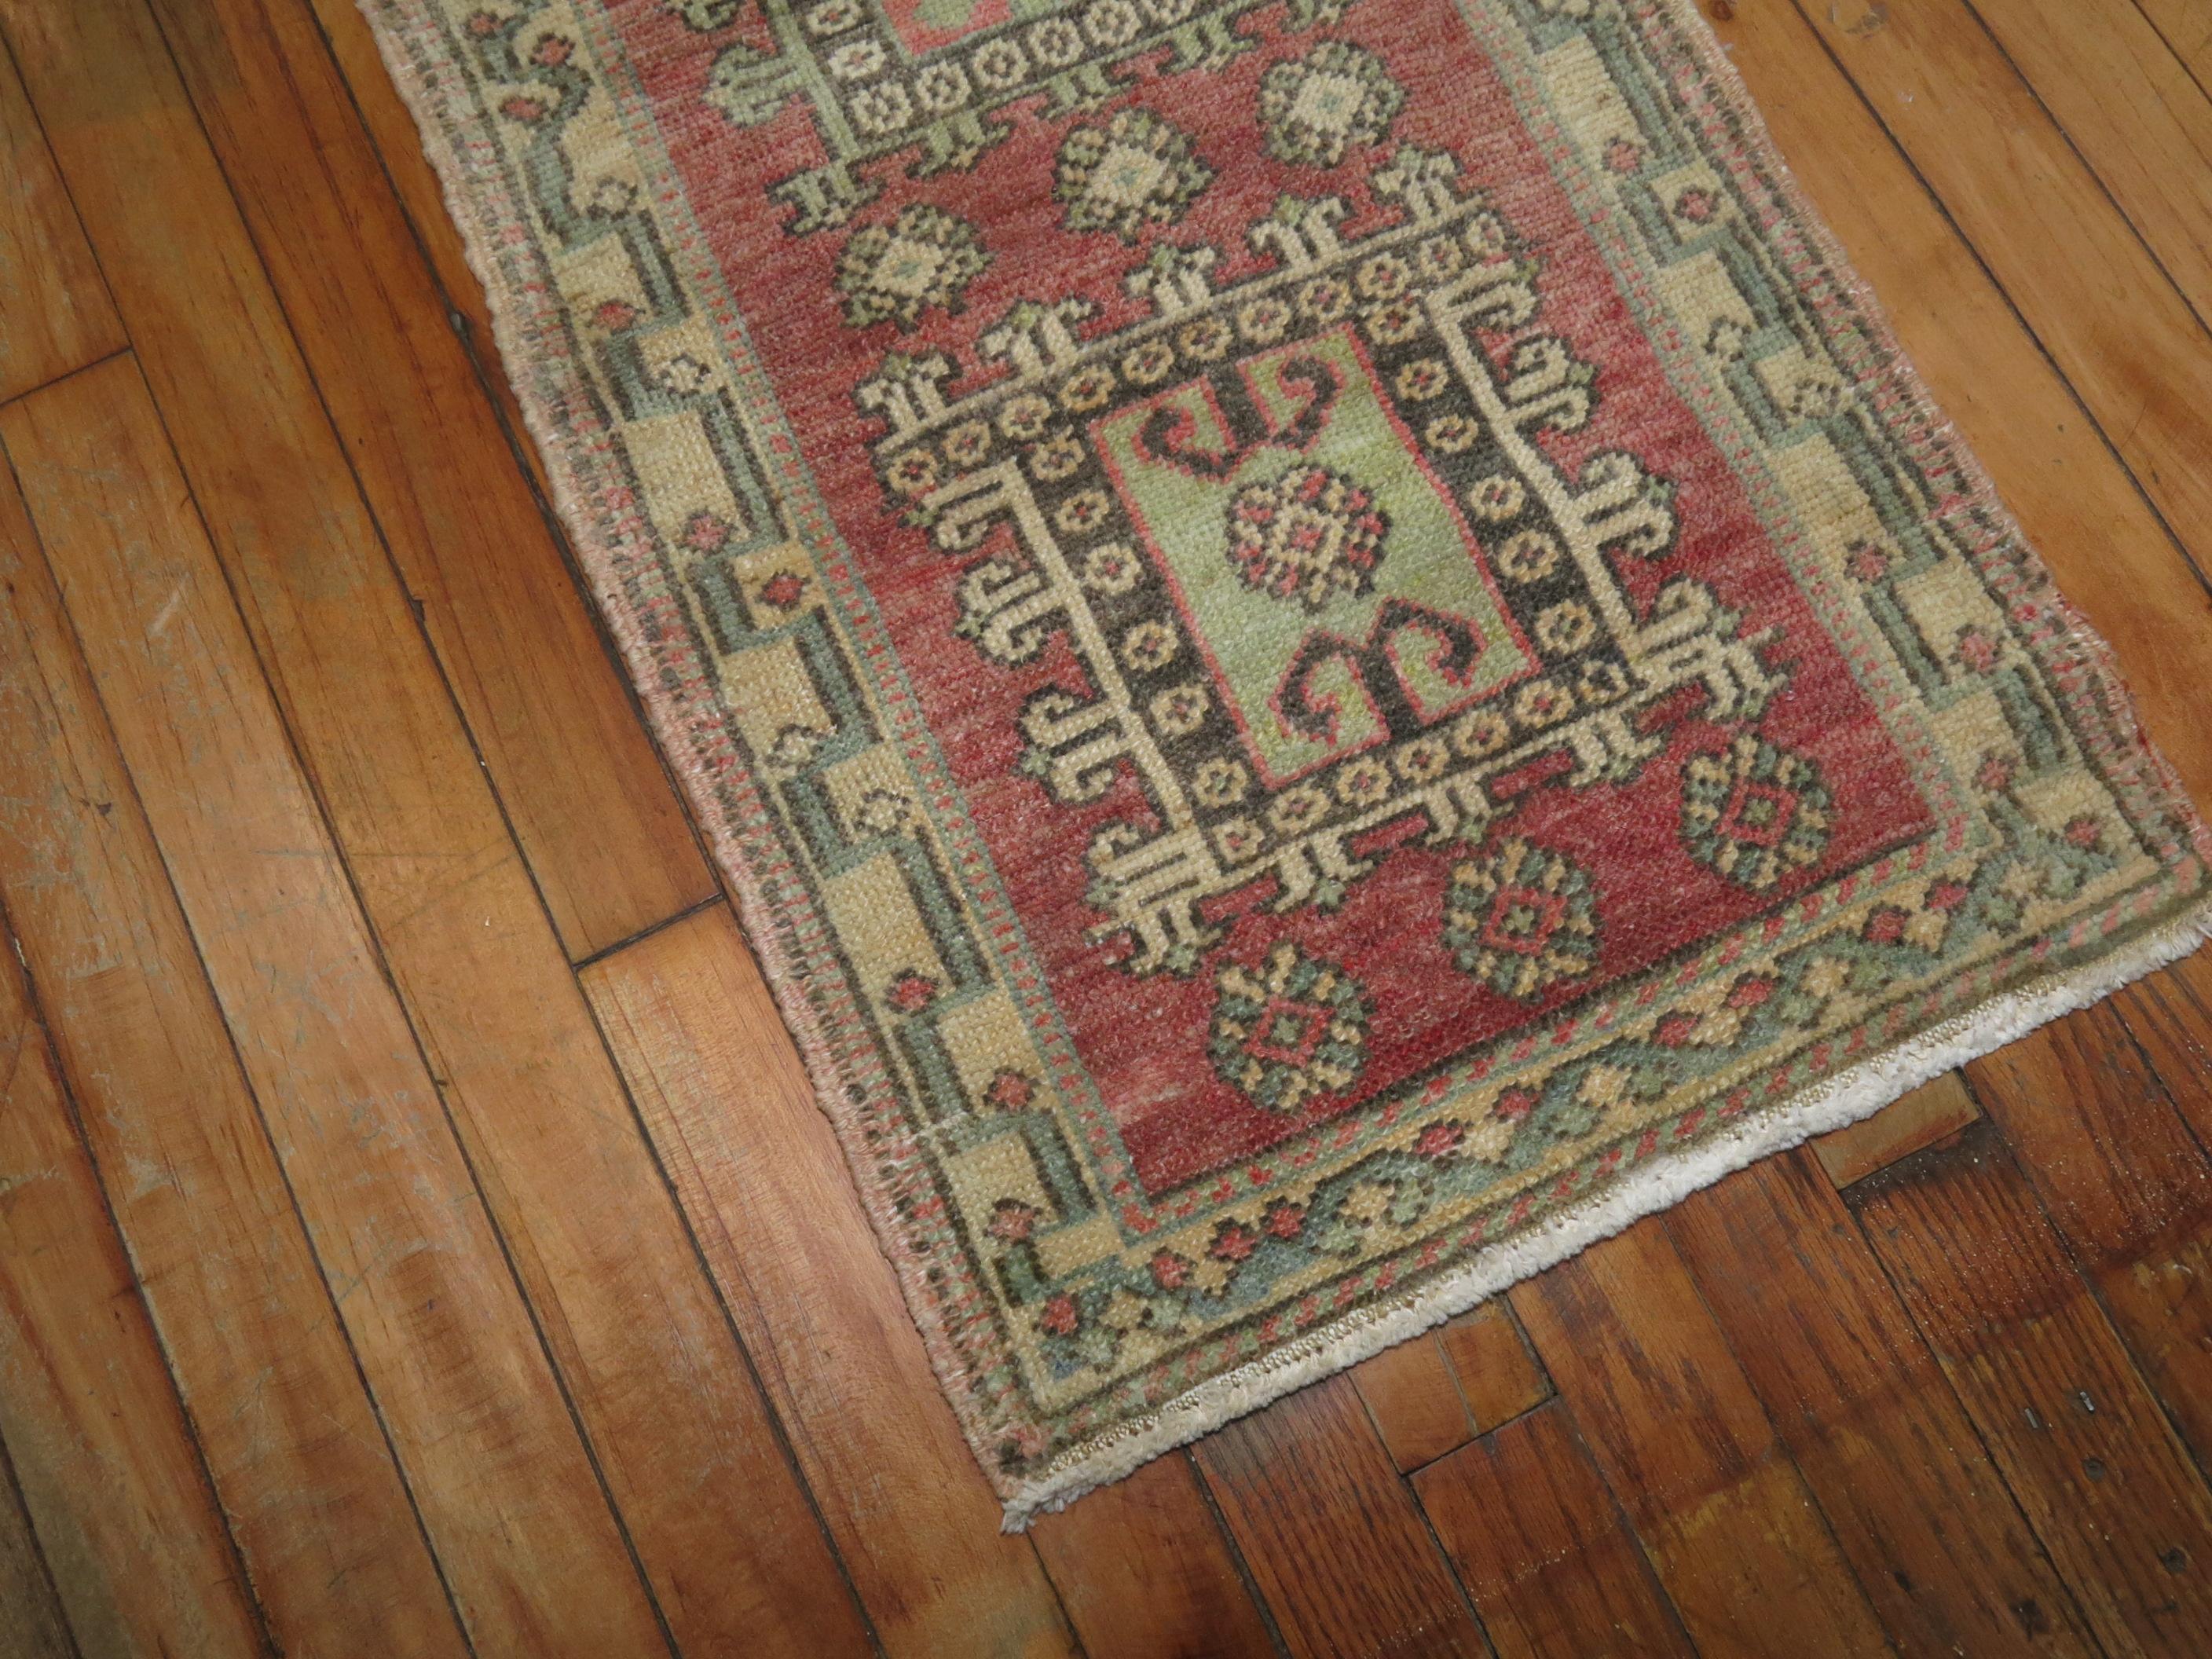 One of a kind vintage Turkish Anatolian rug with 3 medallions a rose background and narrow beige border. Some pretty greens too

Measures: 1'7” x 3'10”.